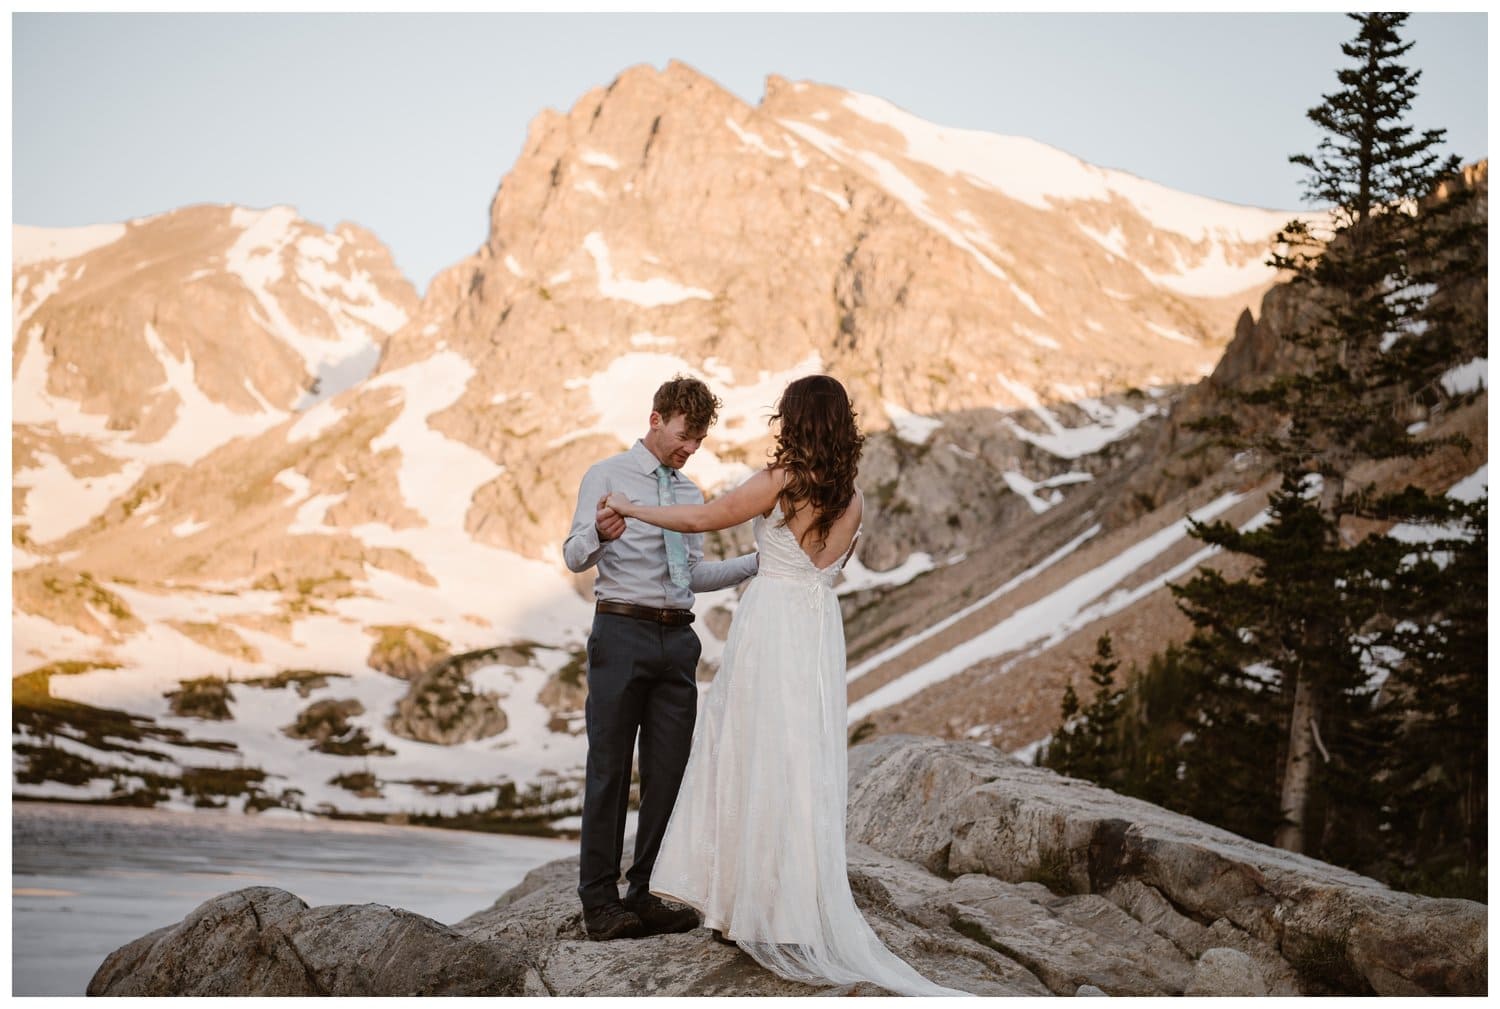 Bride and groom share a first look on their elopement day at the Indian Peaks in Colorado. There is an alpine lake and snow-capped mountains with alpenglow in the background.